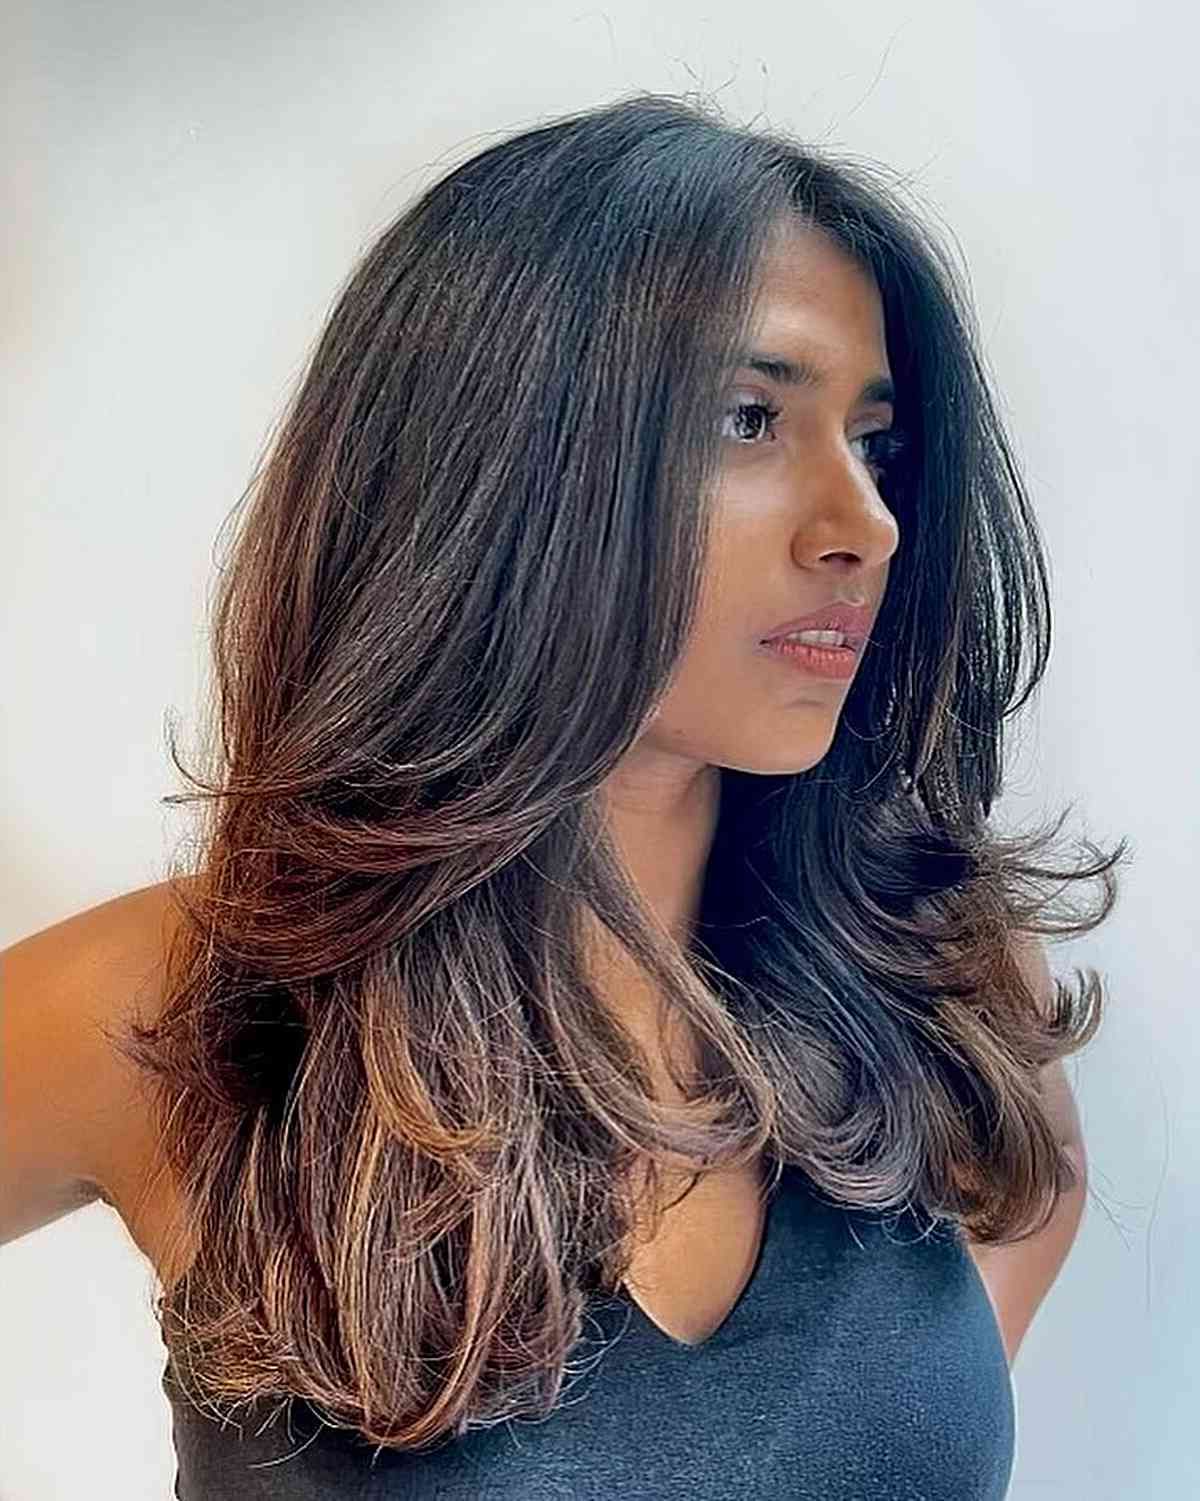 Preferred Textured Cut For Thick Hair With Regard To 90 Best Medium Length Hairstyles For Thick Hair To Feel Lighter (View 12 of 20)